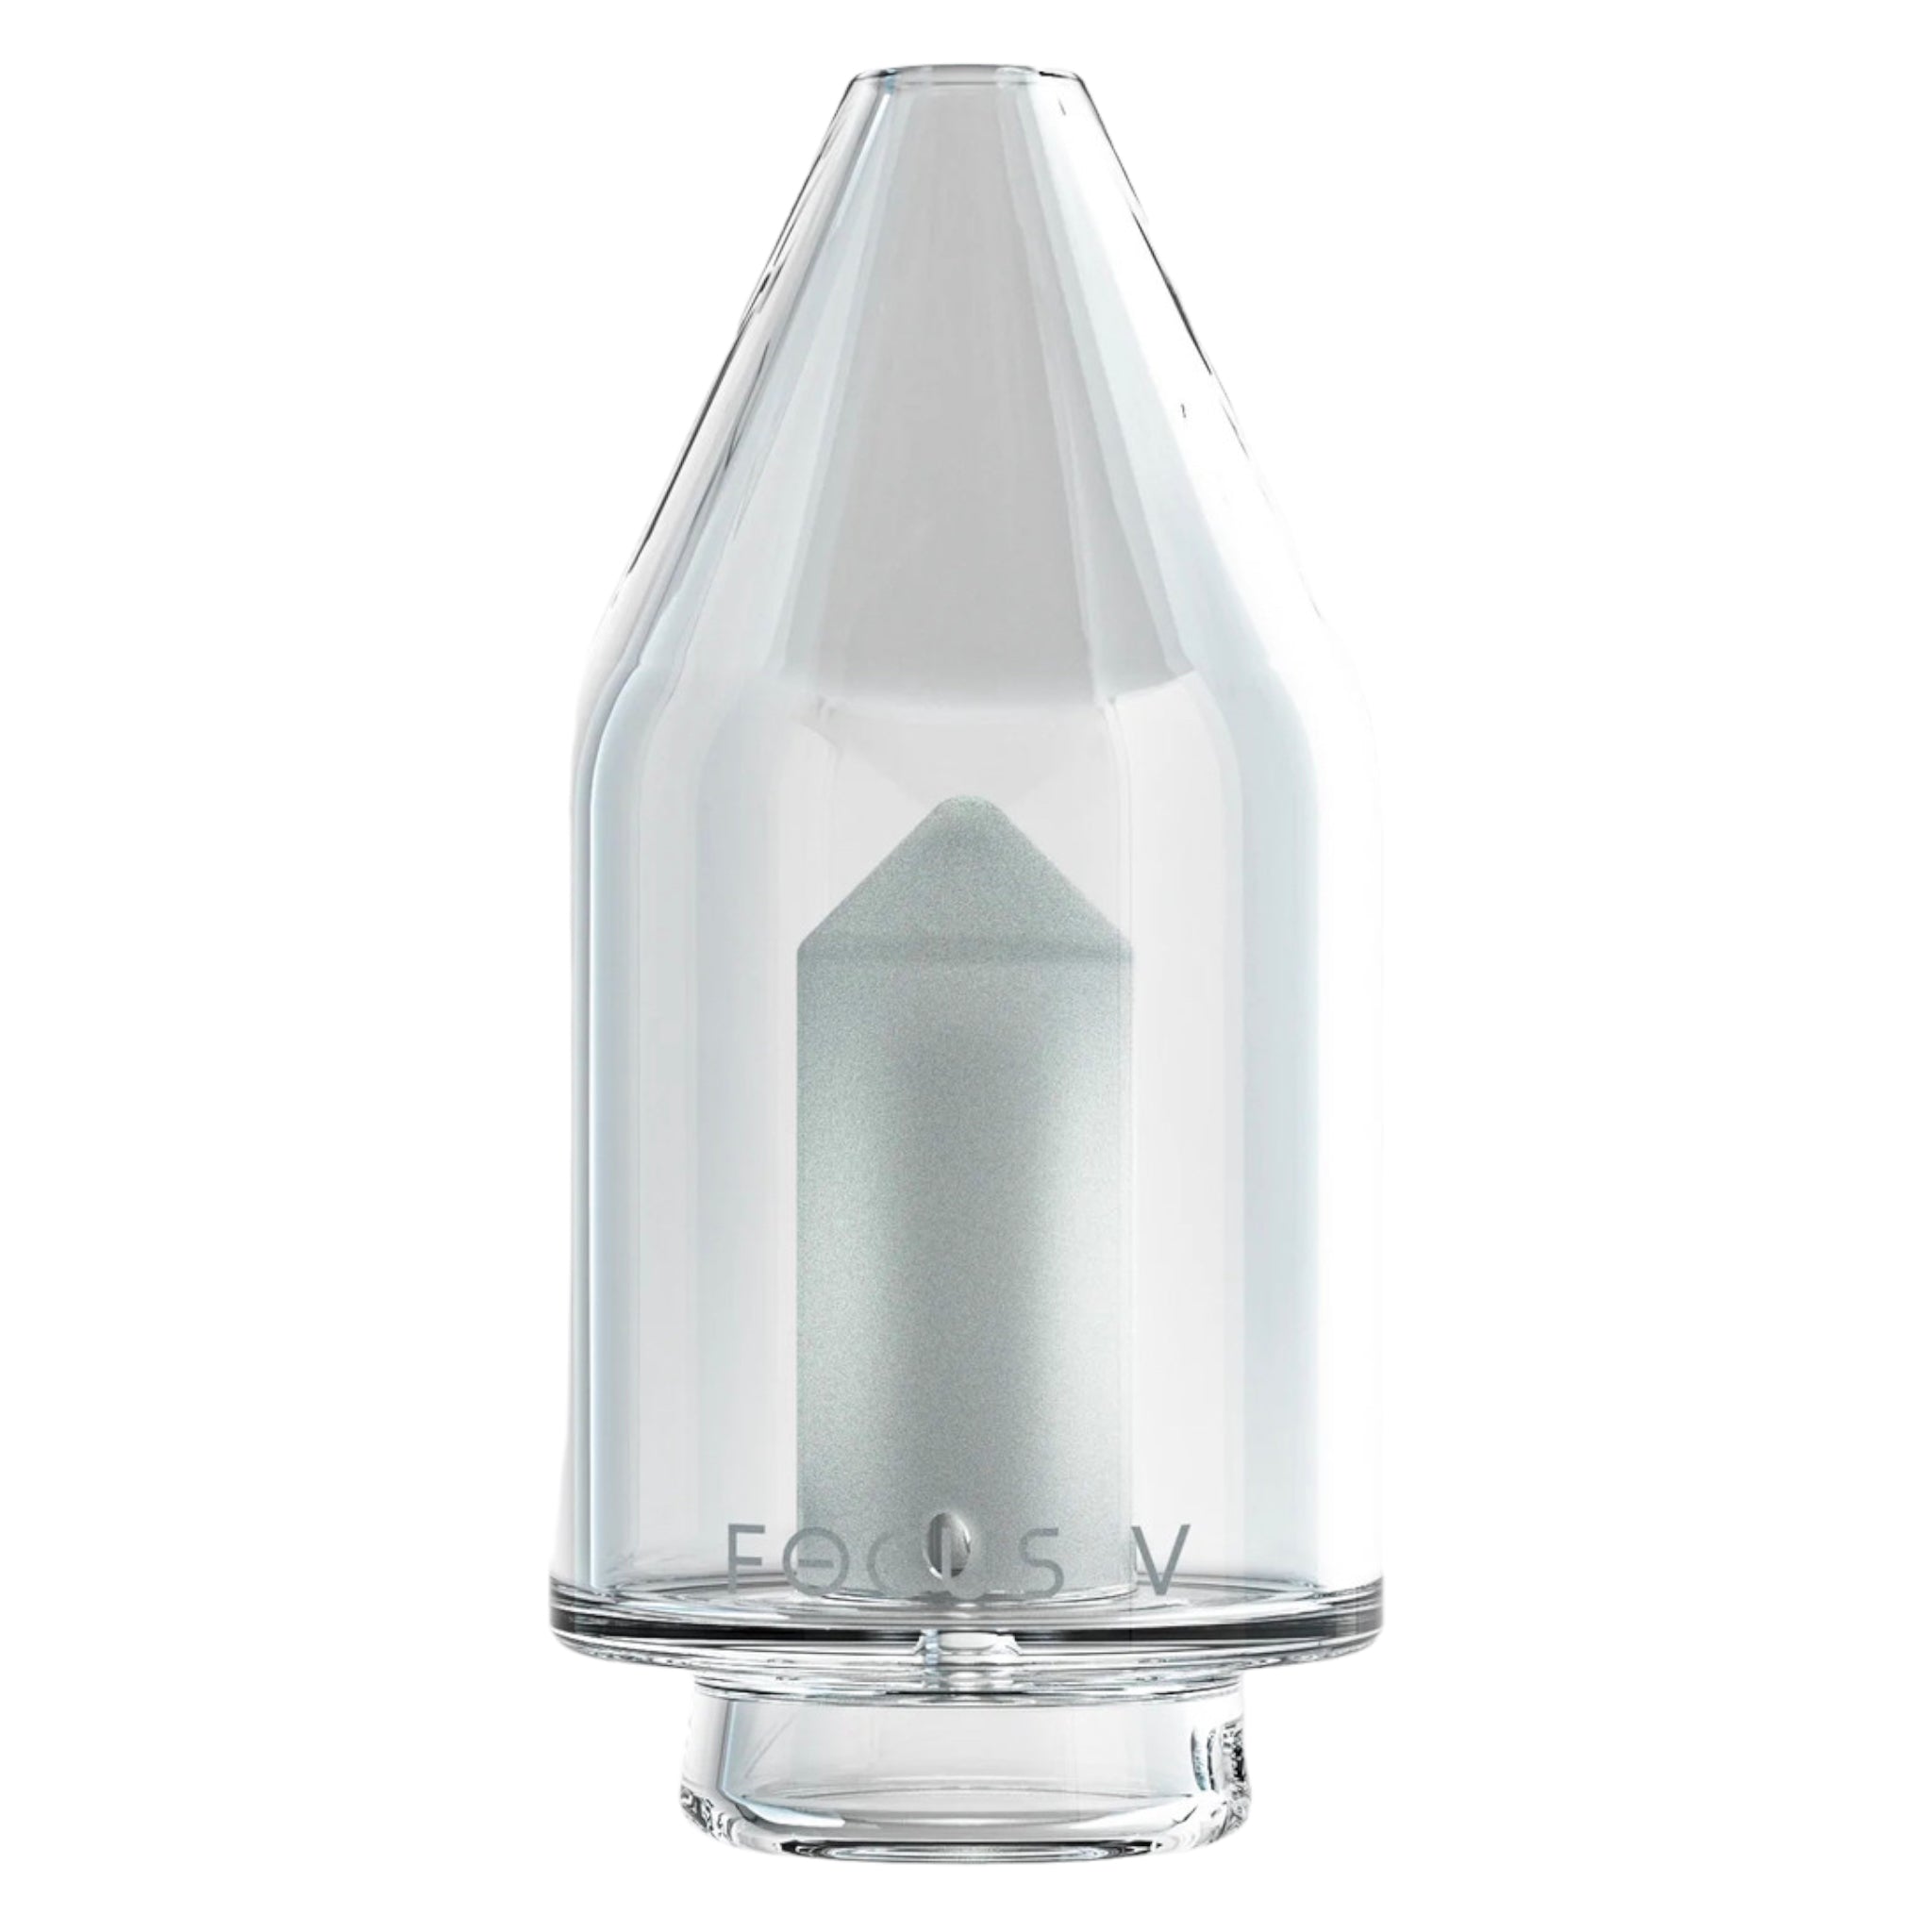 Focus V - CARTA 2 - Replacement Clear Glass Attachment